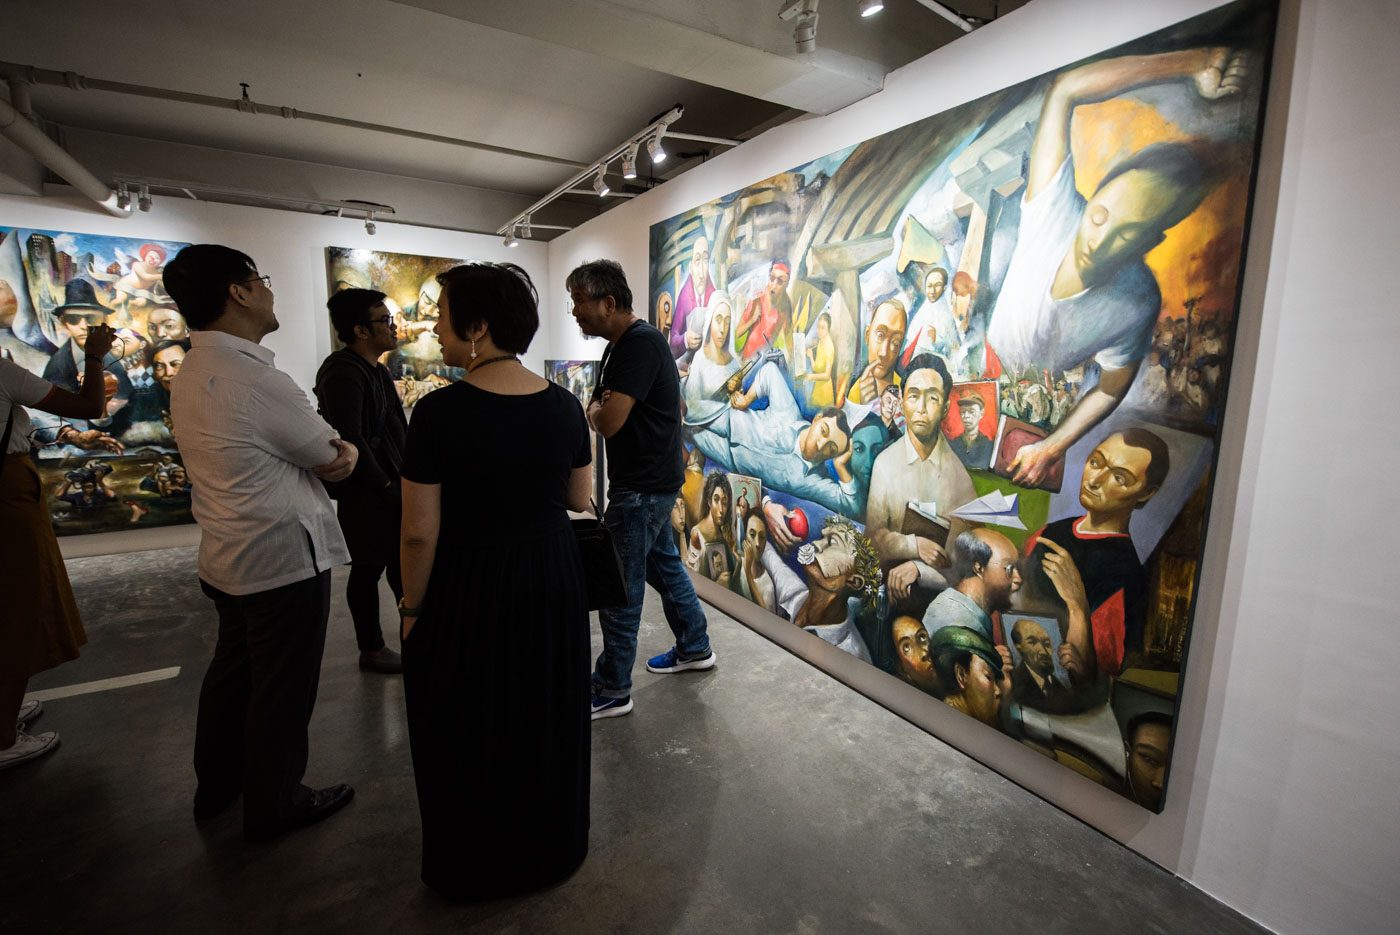 WHO'S WHO. The central piece in the exhibit depicts various public figures from historical and current events. Photo by Alecs Ongcal/Rappler 